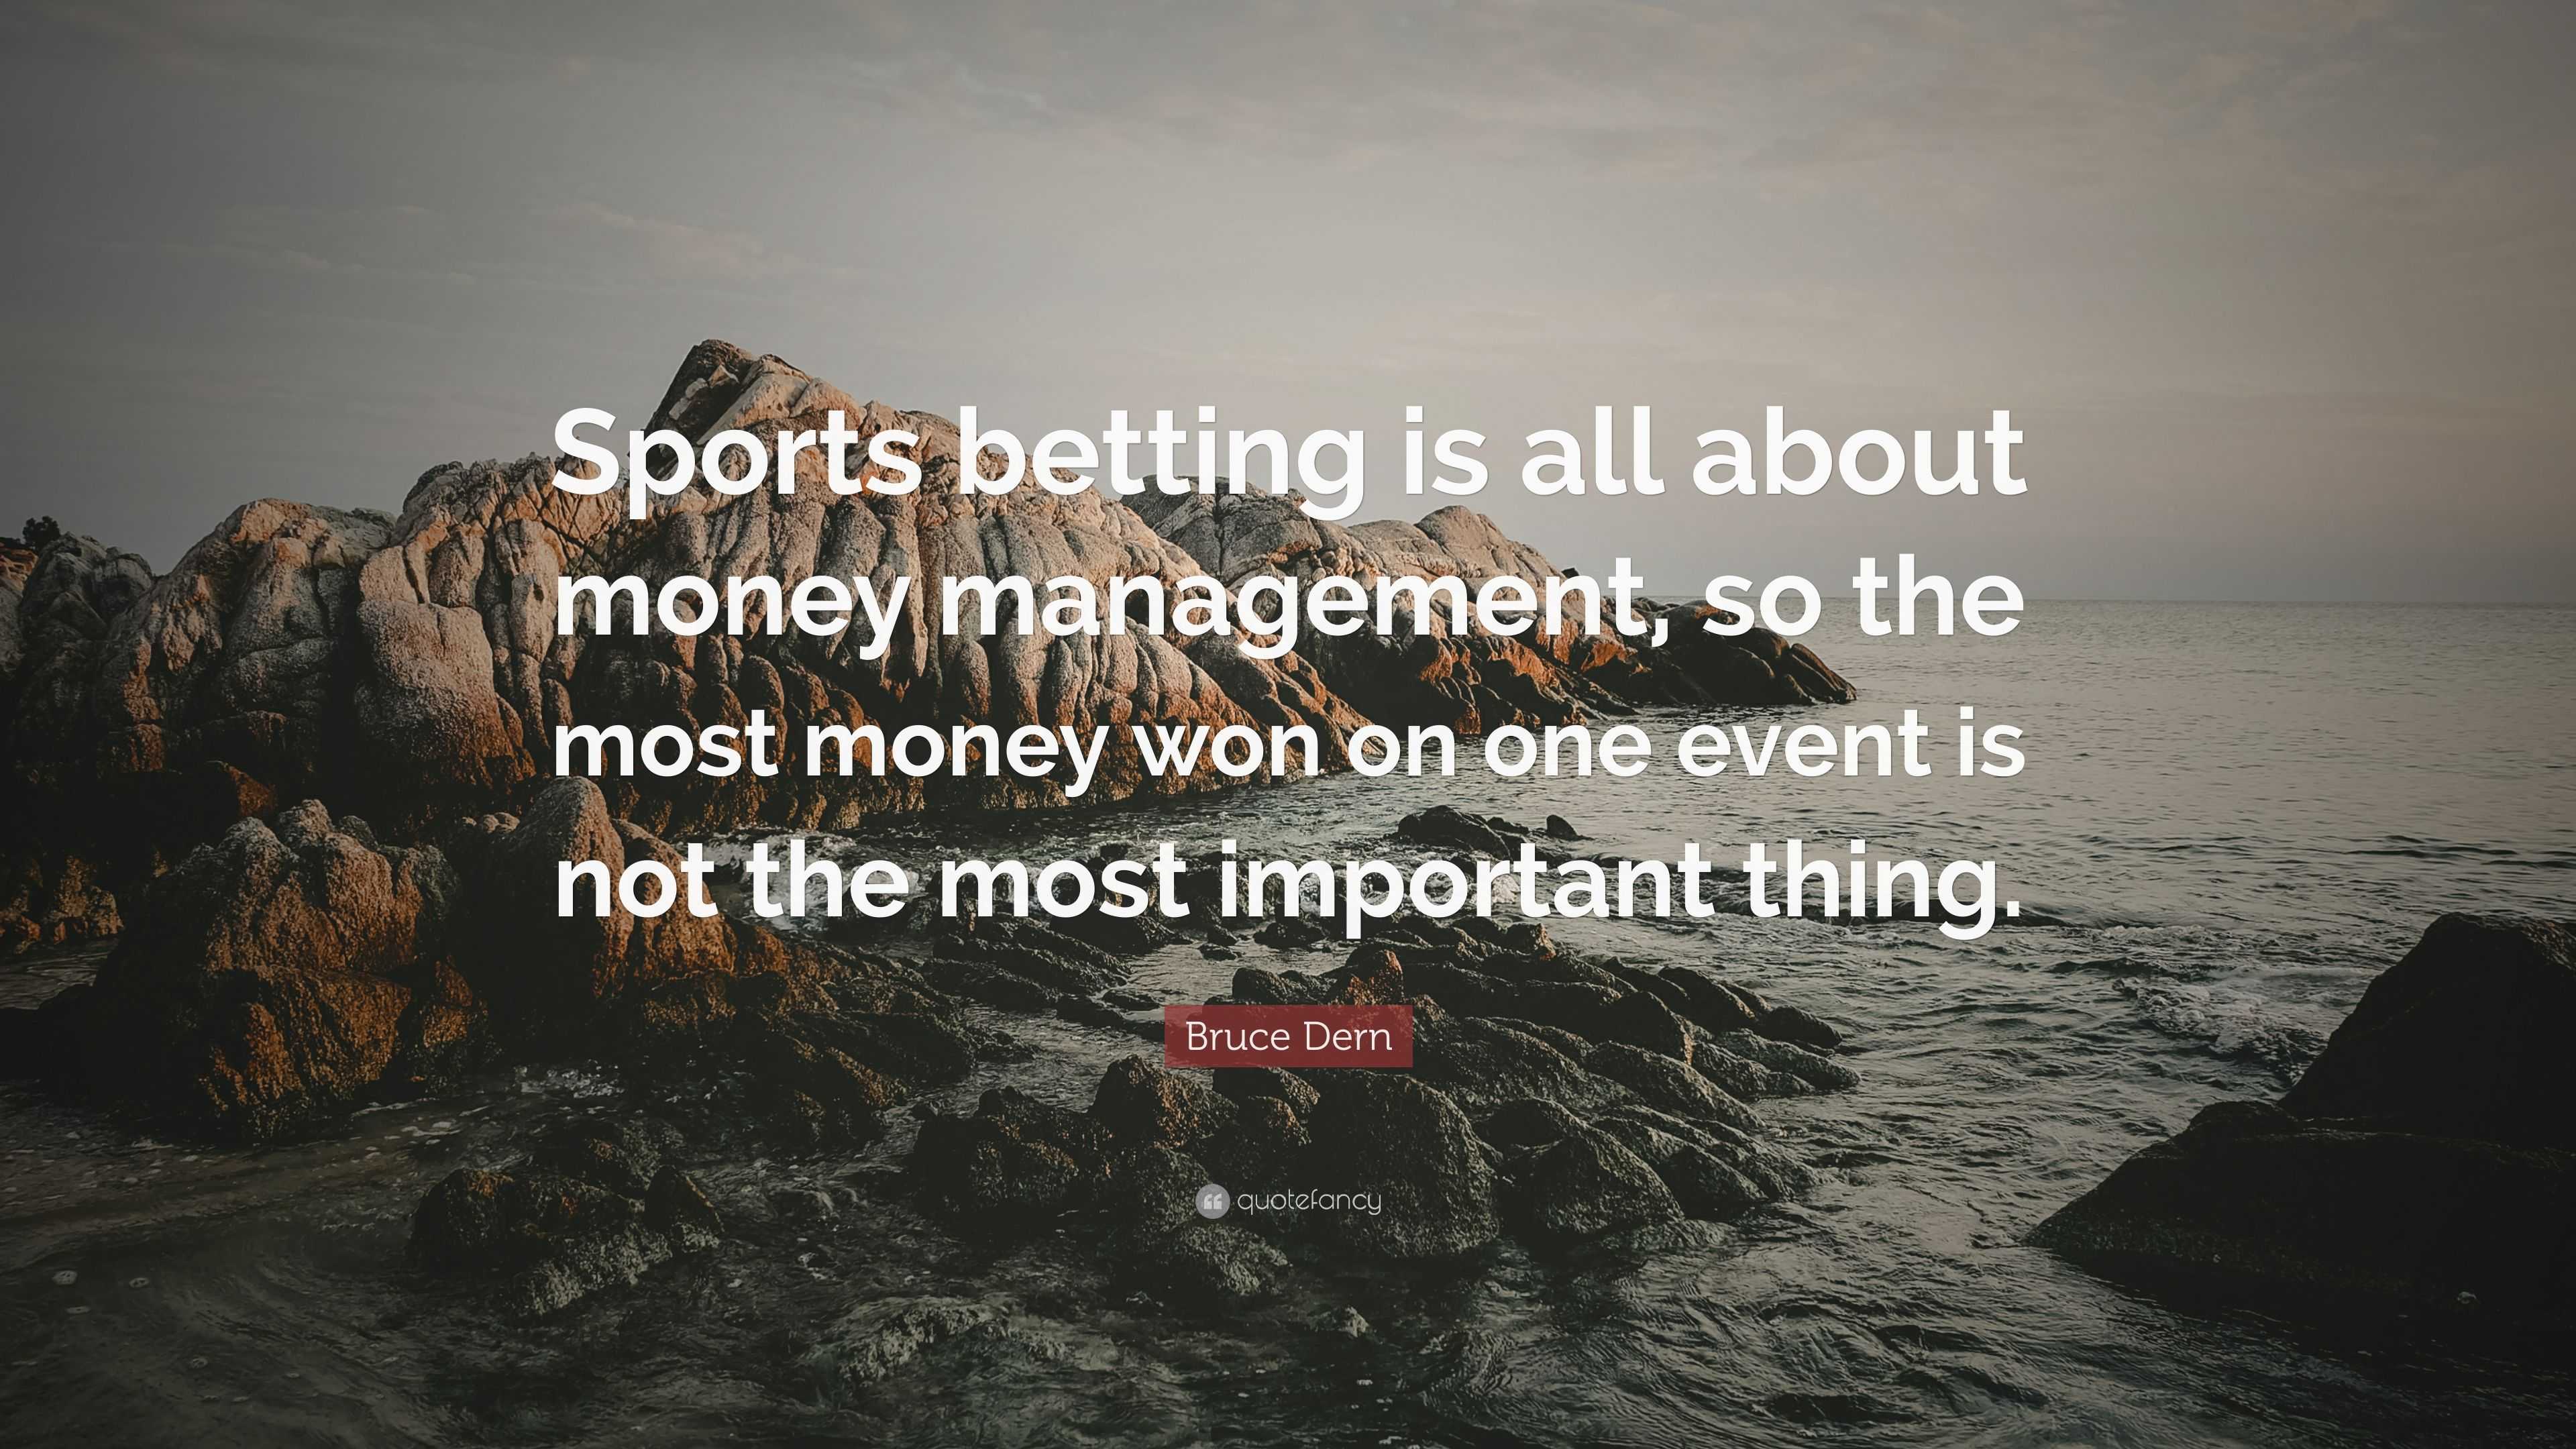 Bruce Dern Quote: “Sports betting is all about money management, so the  most money won on